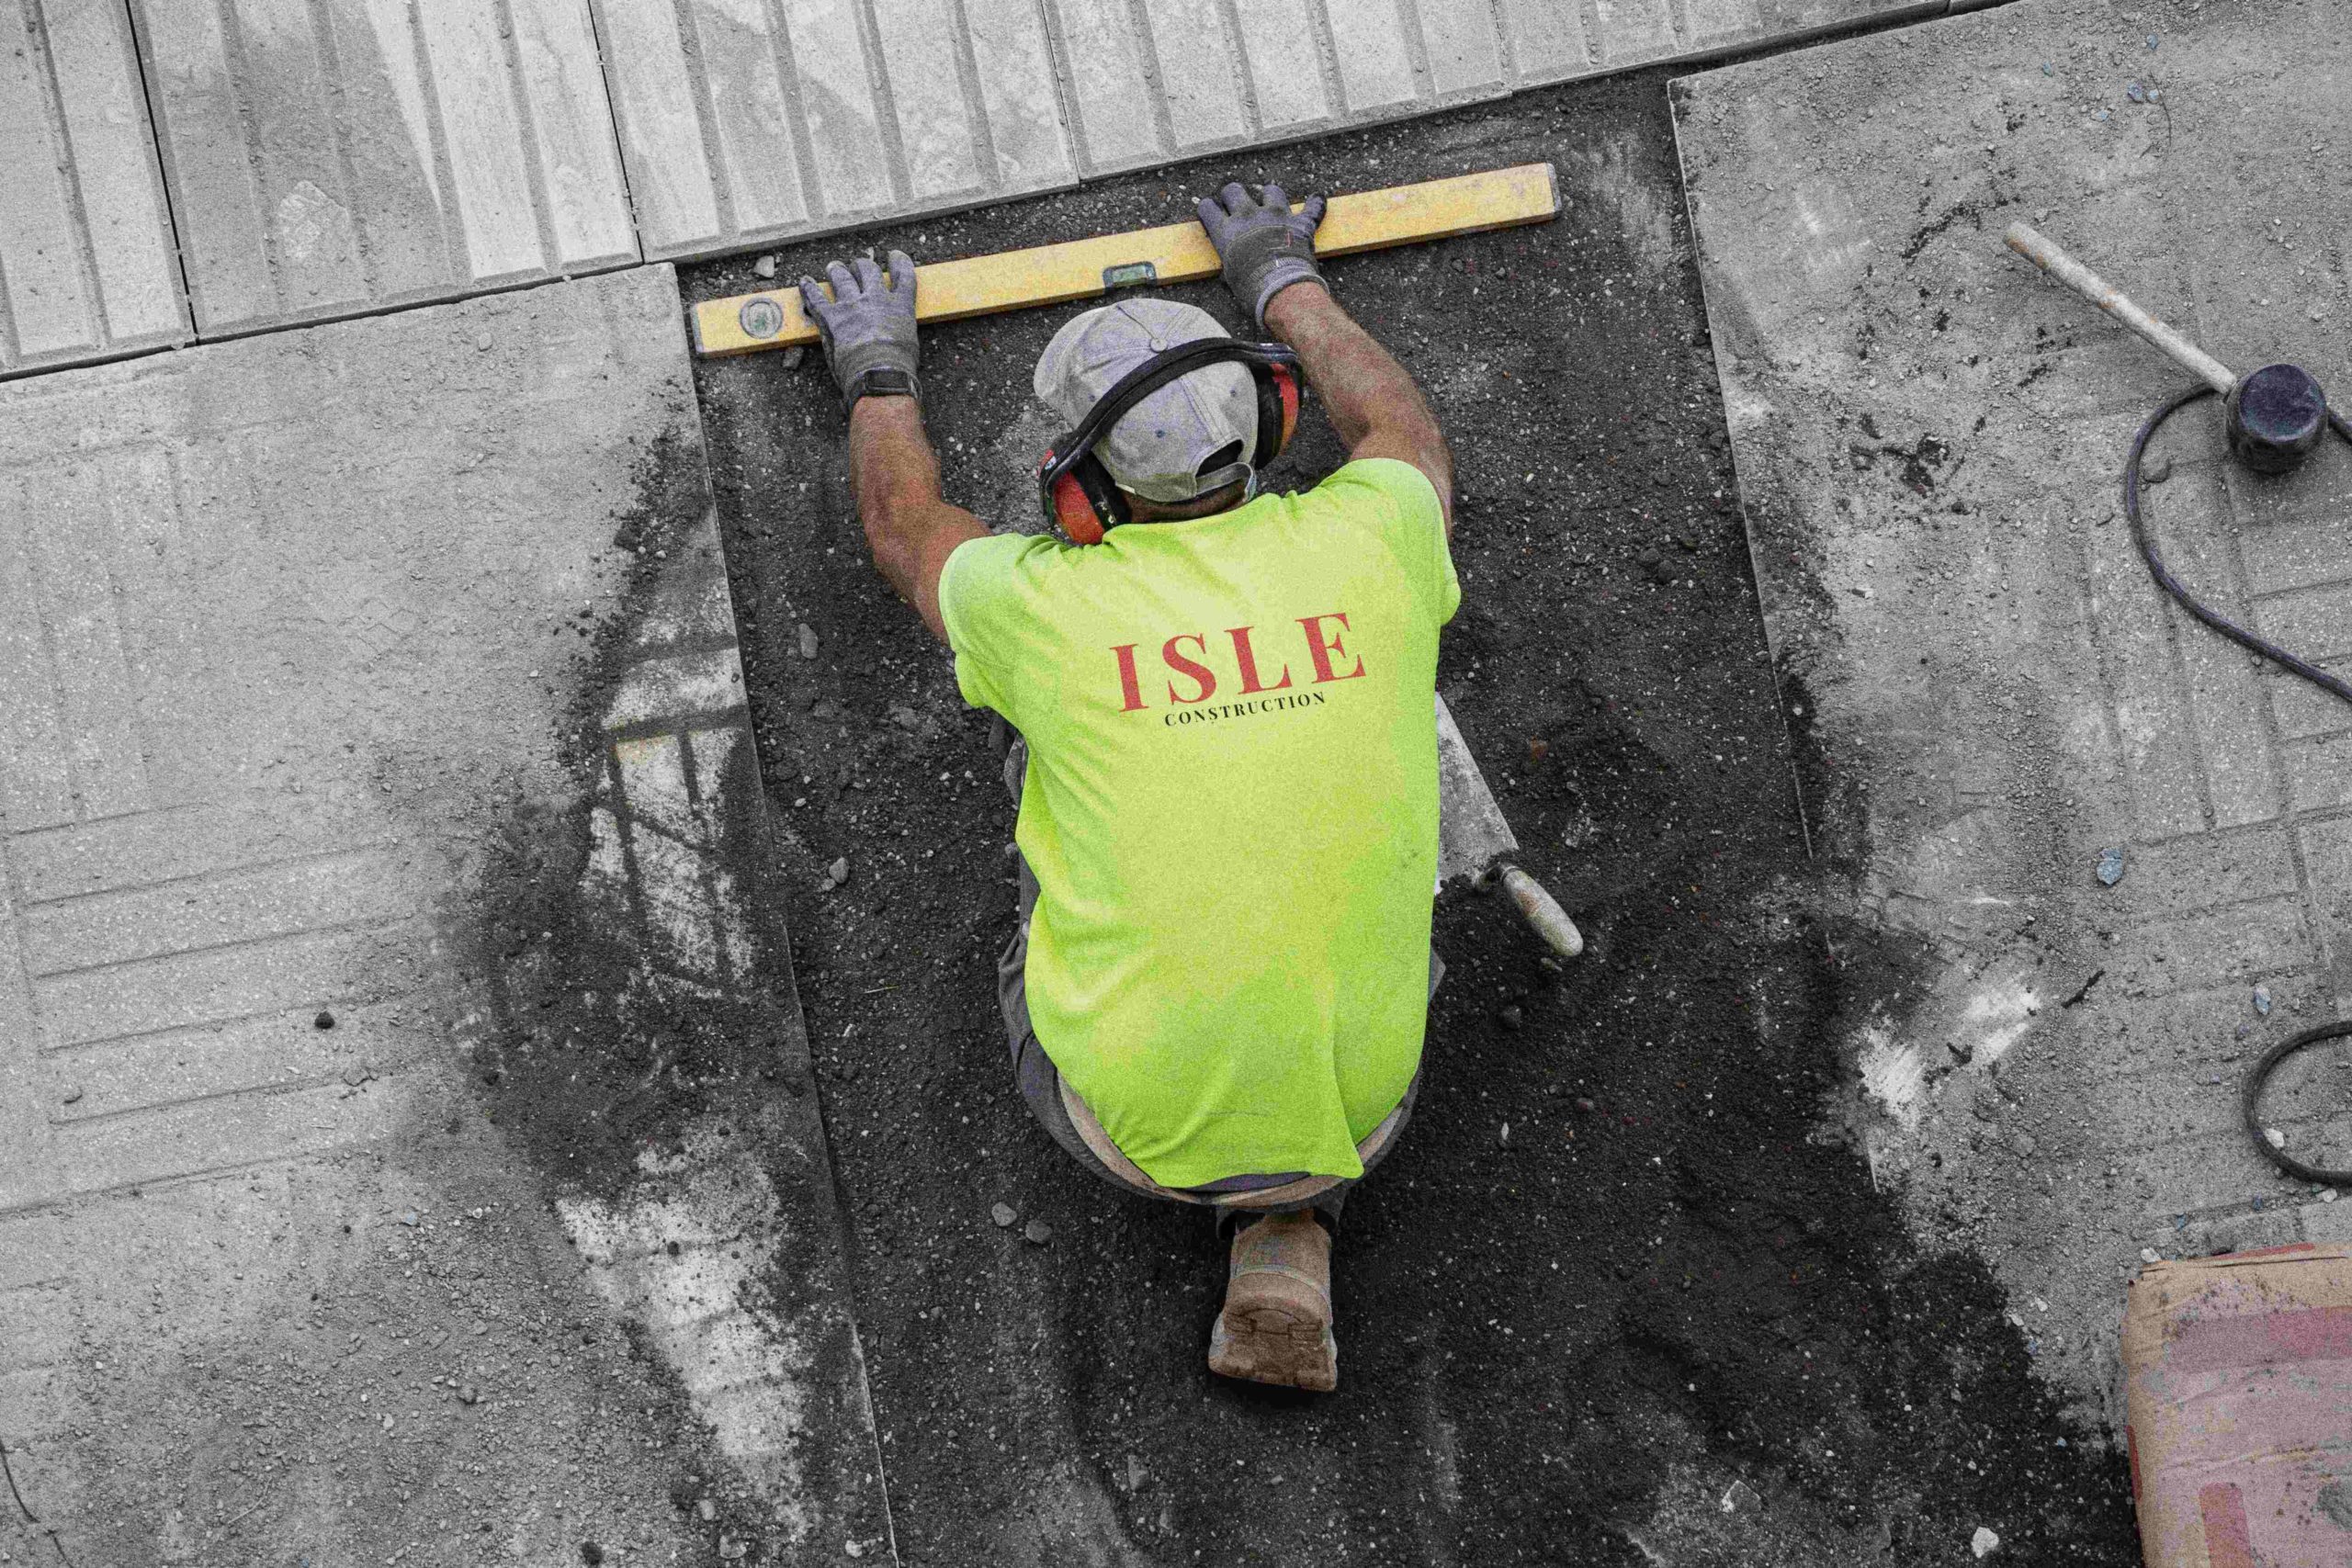 Image of constrcution work laying concrete on the ground, wearing a neon green work shirt with Isle Construction Logo